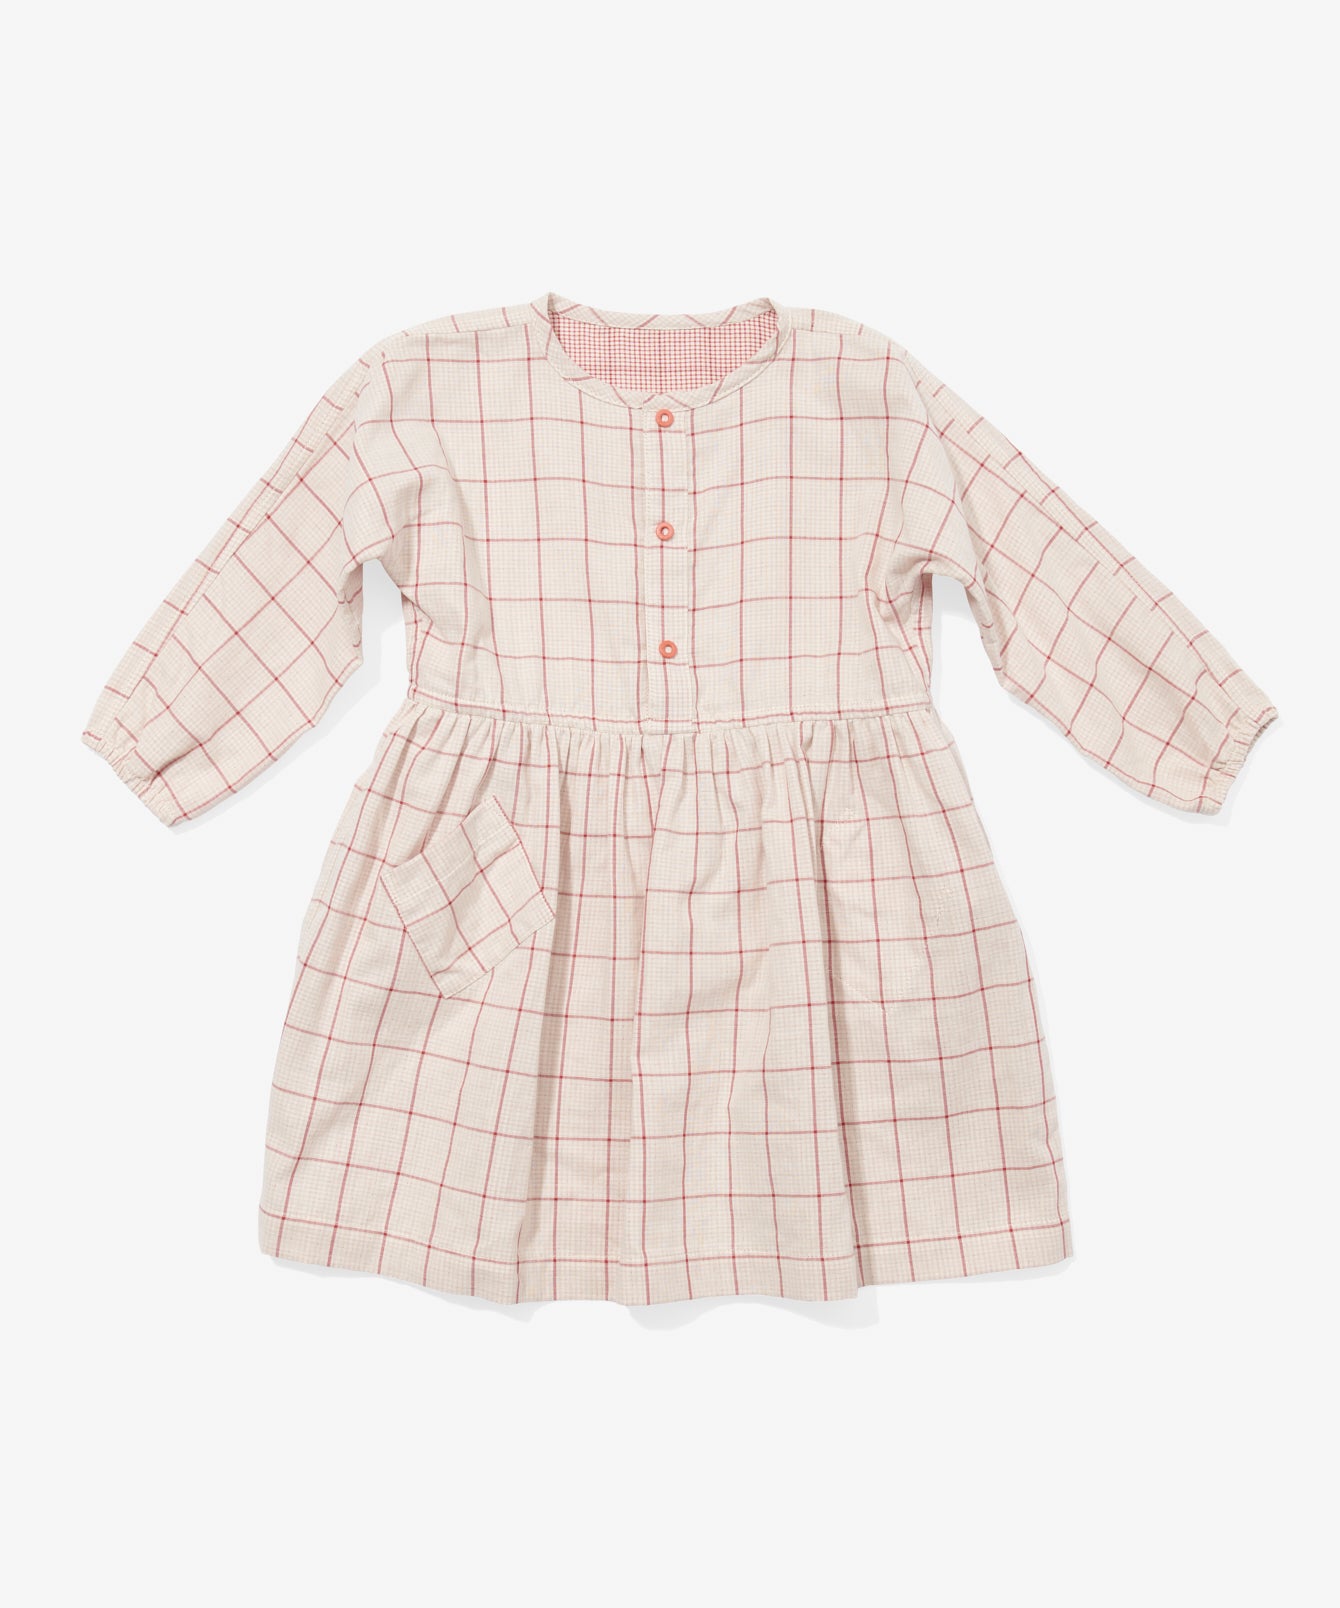 Little Girls Reversible Dress Me & – Me | Oso Oso and